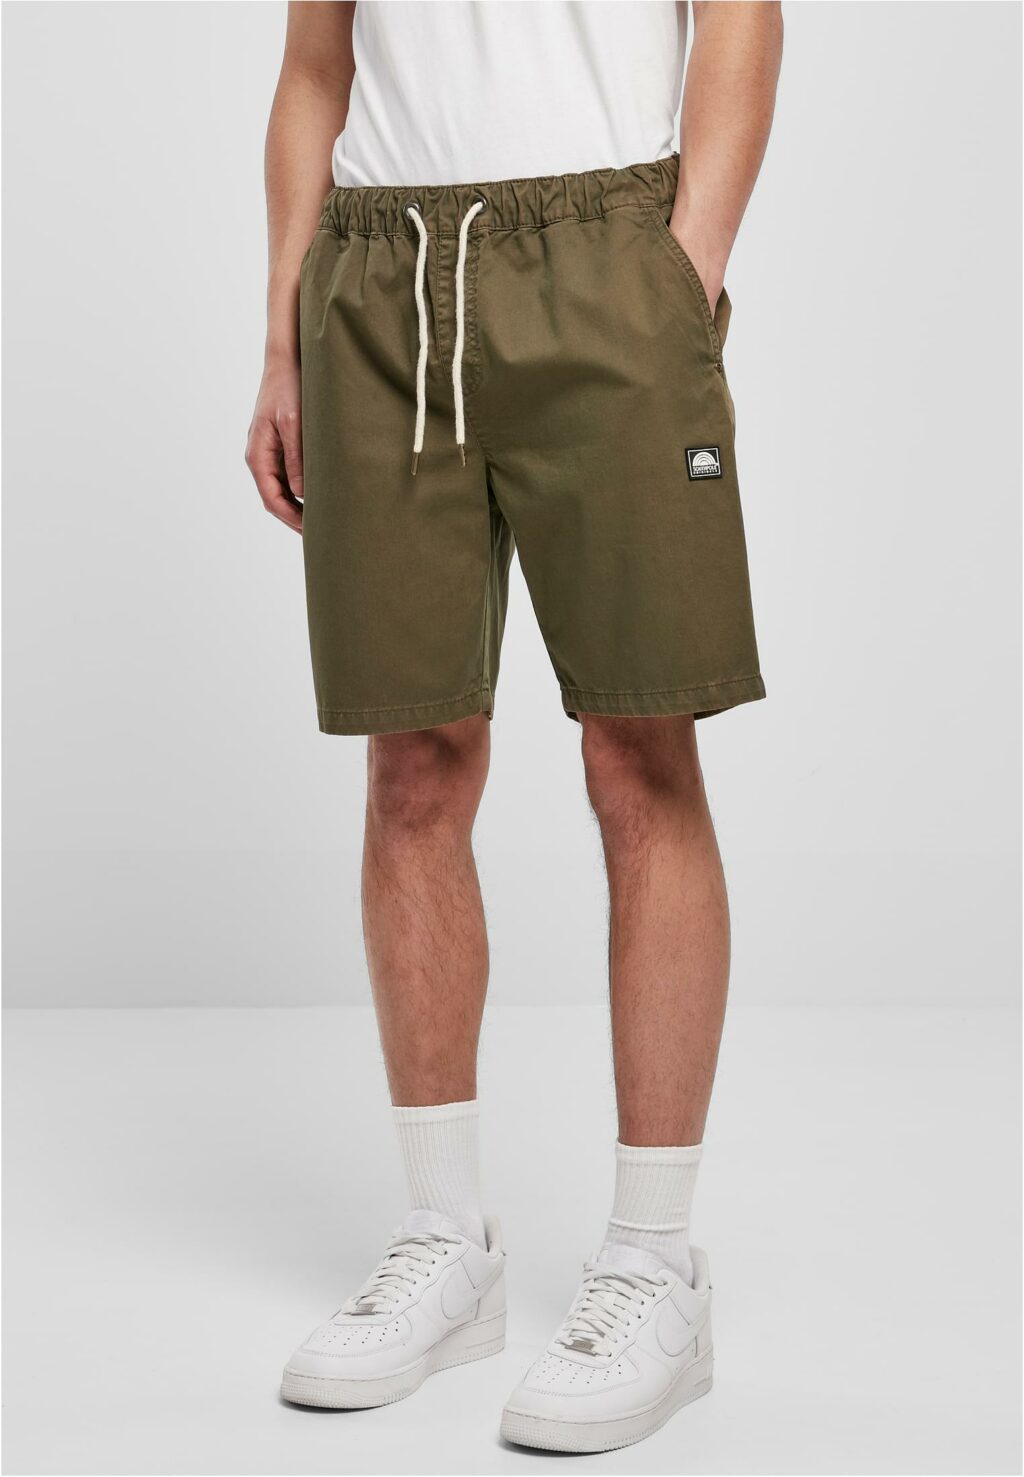 Southpole Twill Shorts olive SP211